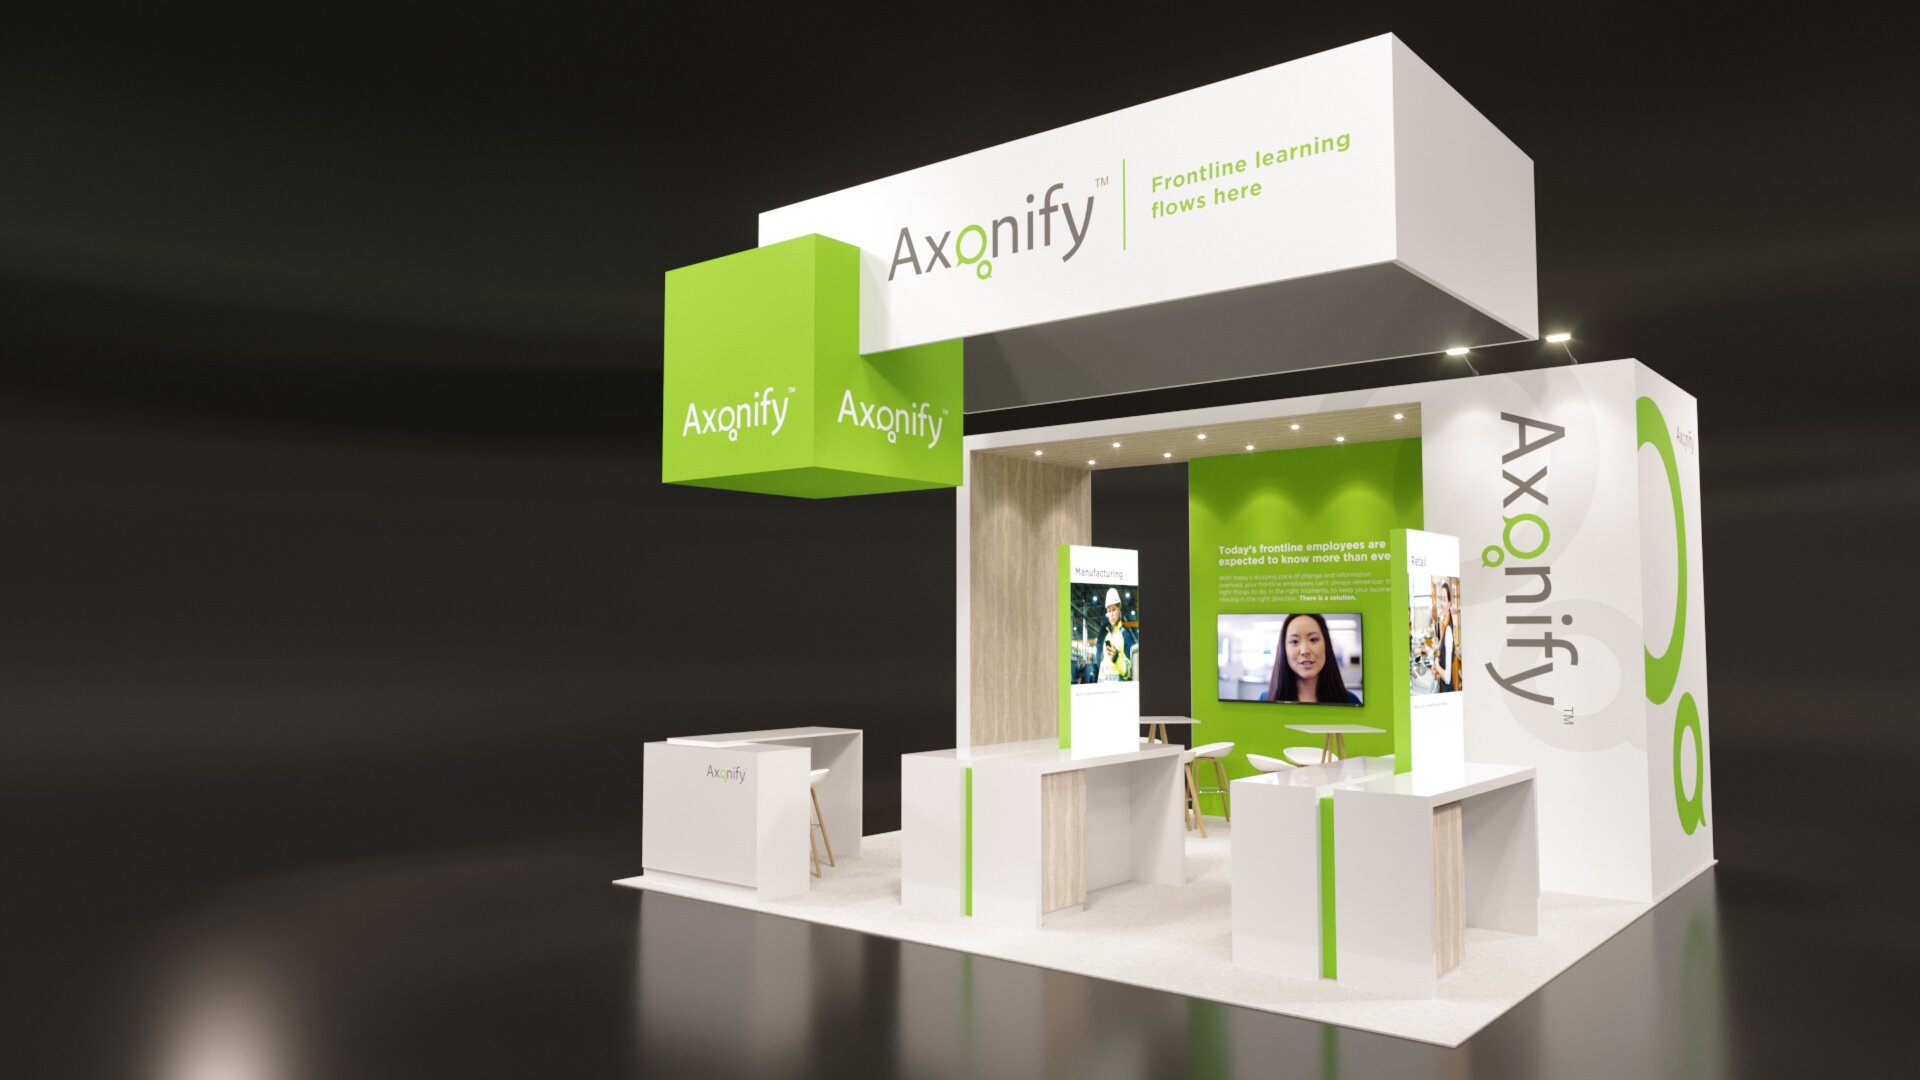 Axonify_ATD Trade Show_20'x20'_Exhibit Booth (4).jpg